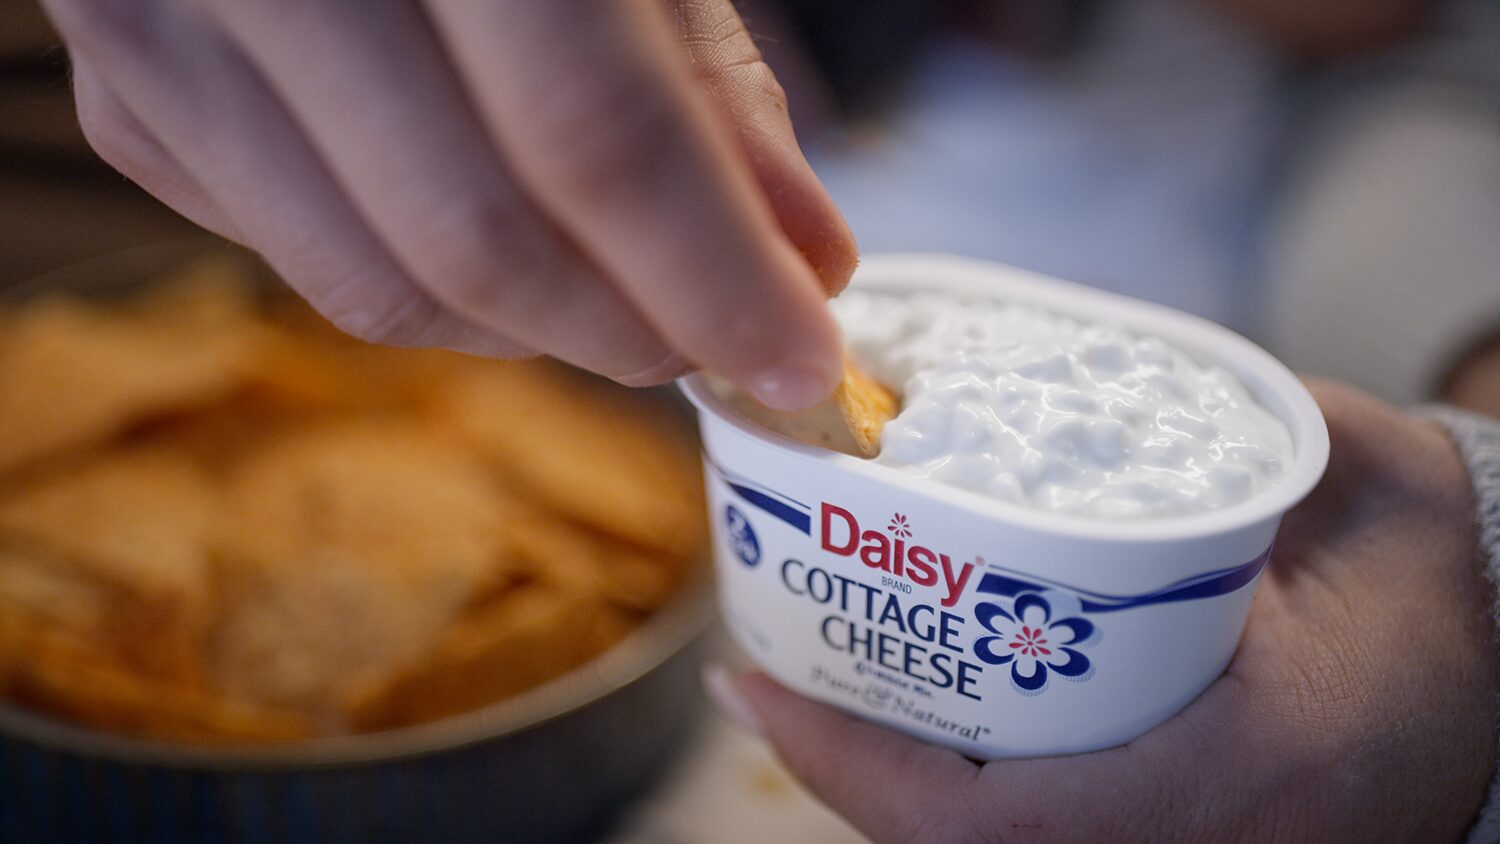 Cottage Cheese - Daisy Brand - Sour Cream & Cottage Cheese